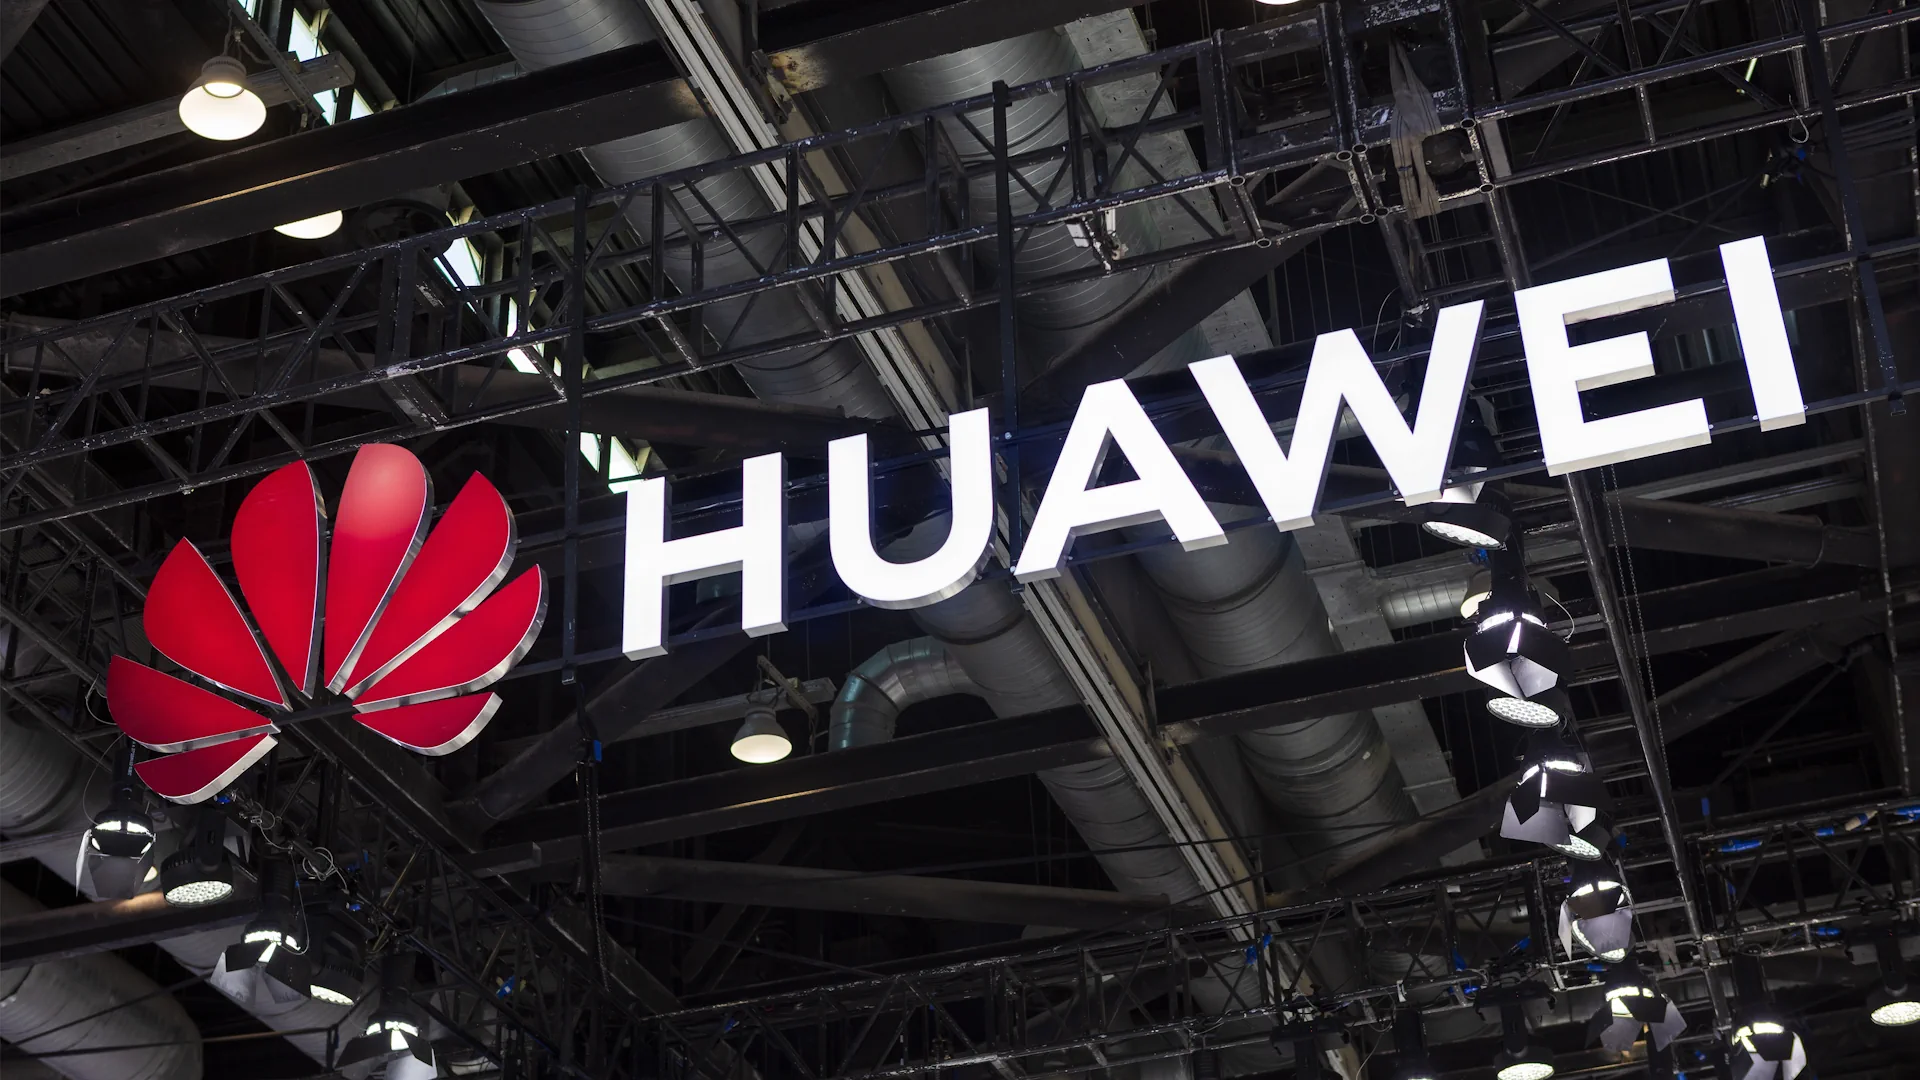 Huawei plans to produce 100 million smartphones next year